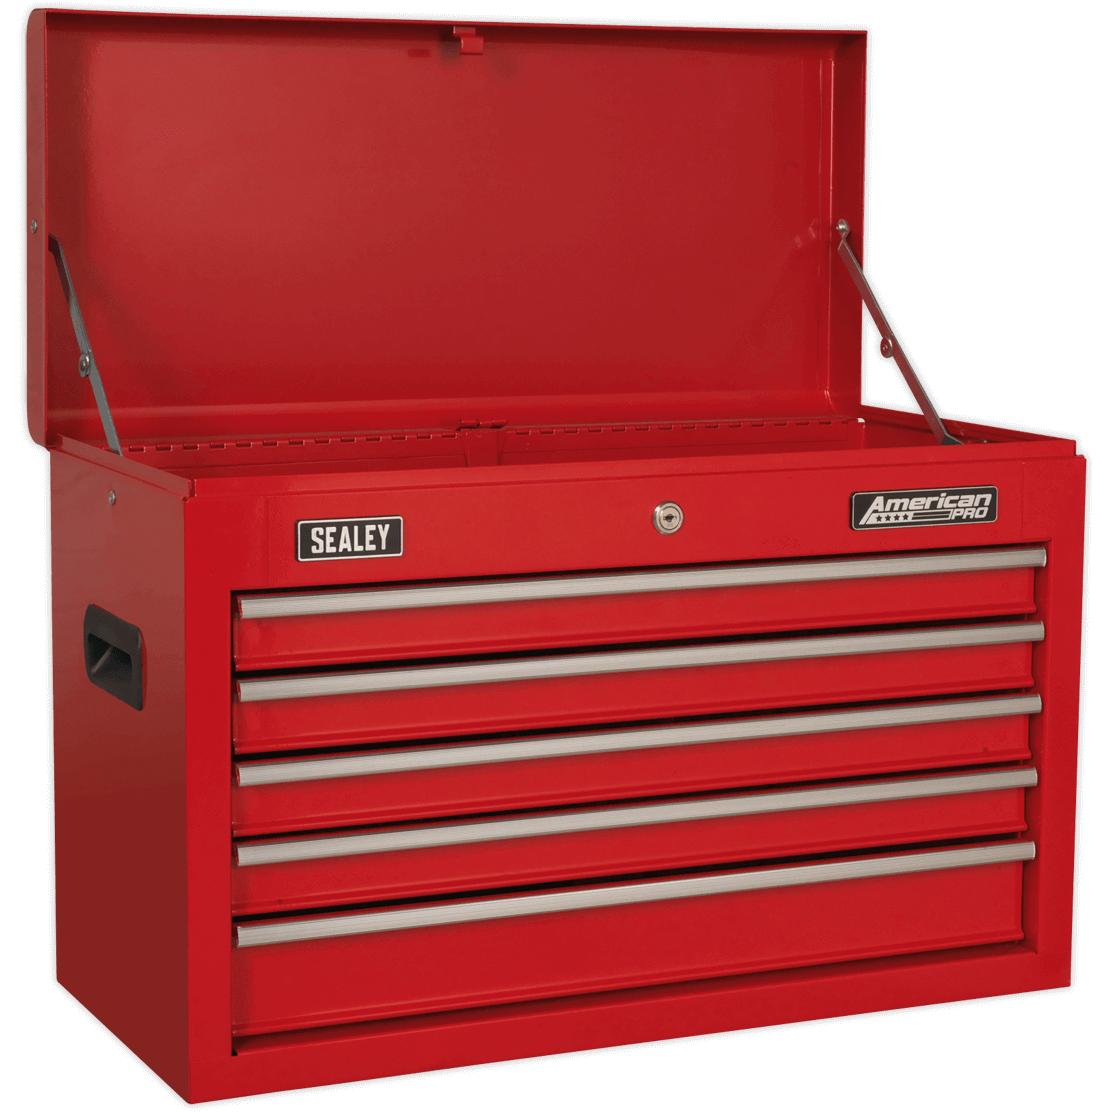 Sealey American Pro 5 Drawer Tool Chest Red